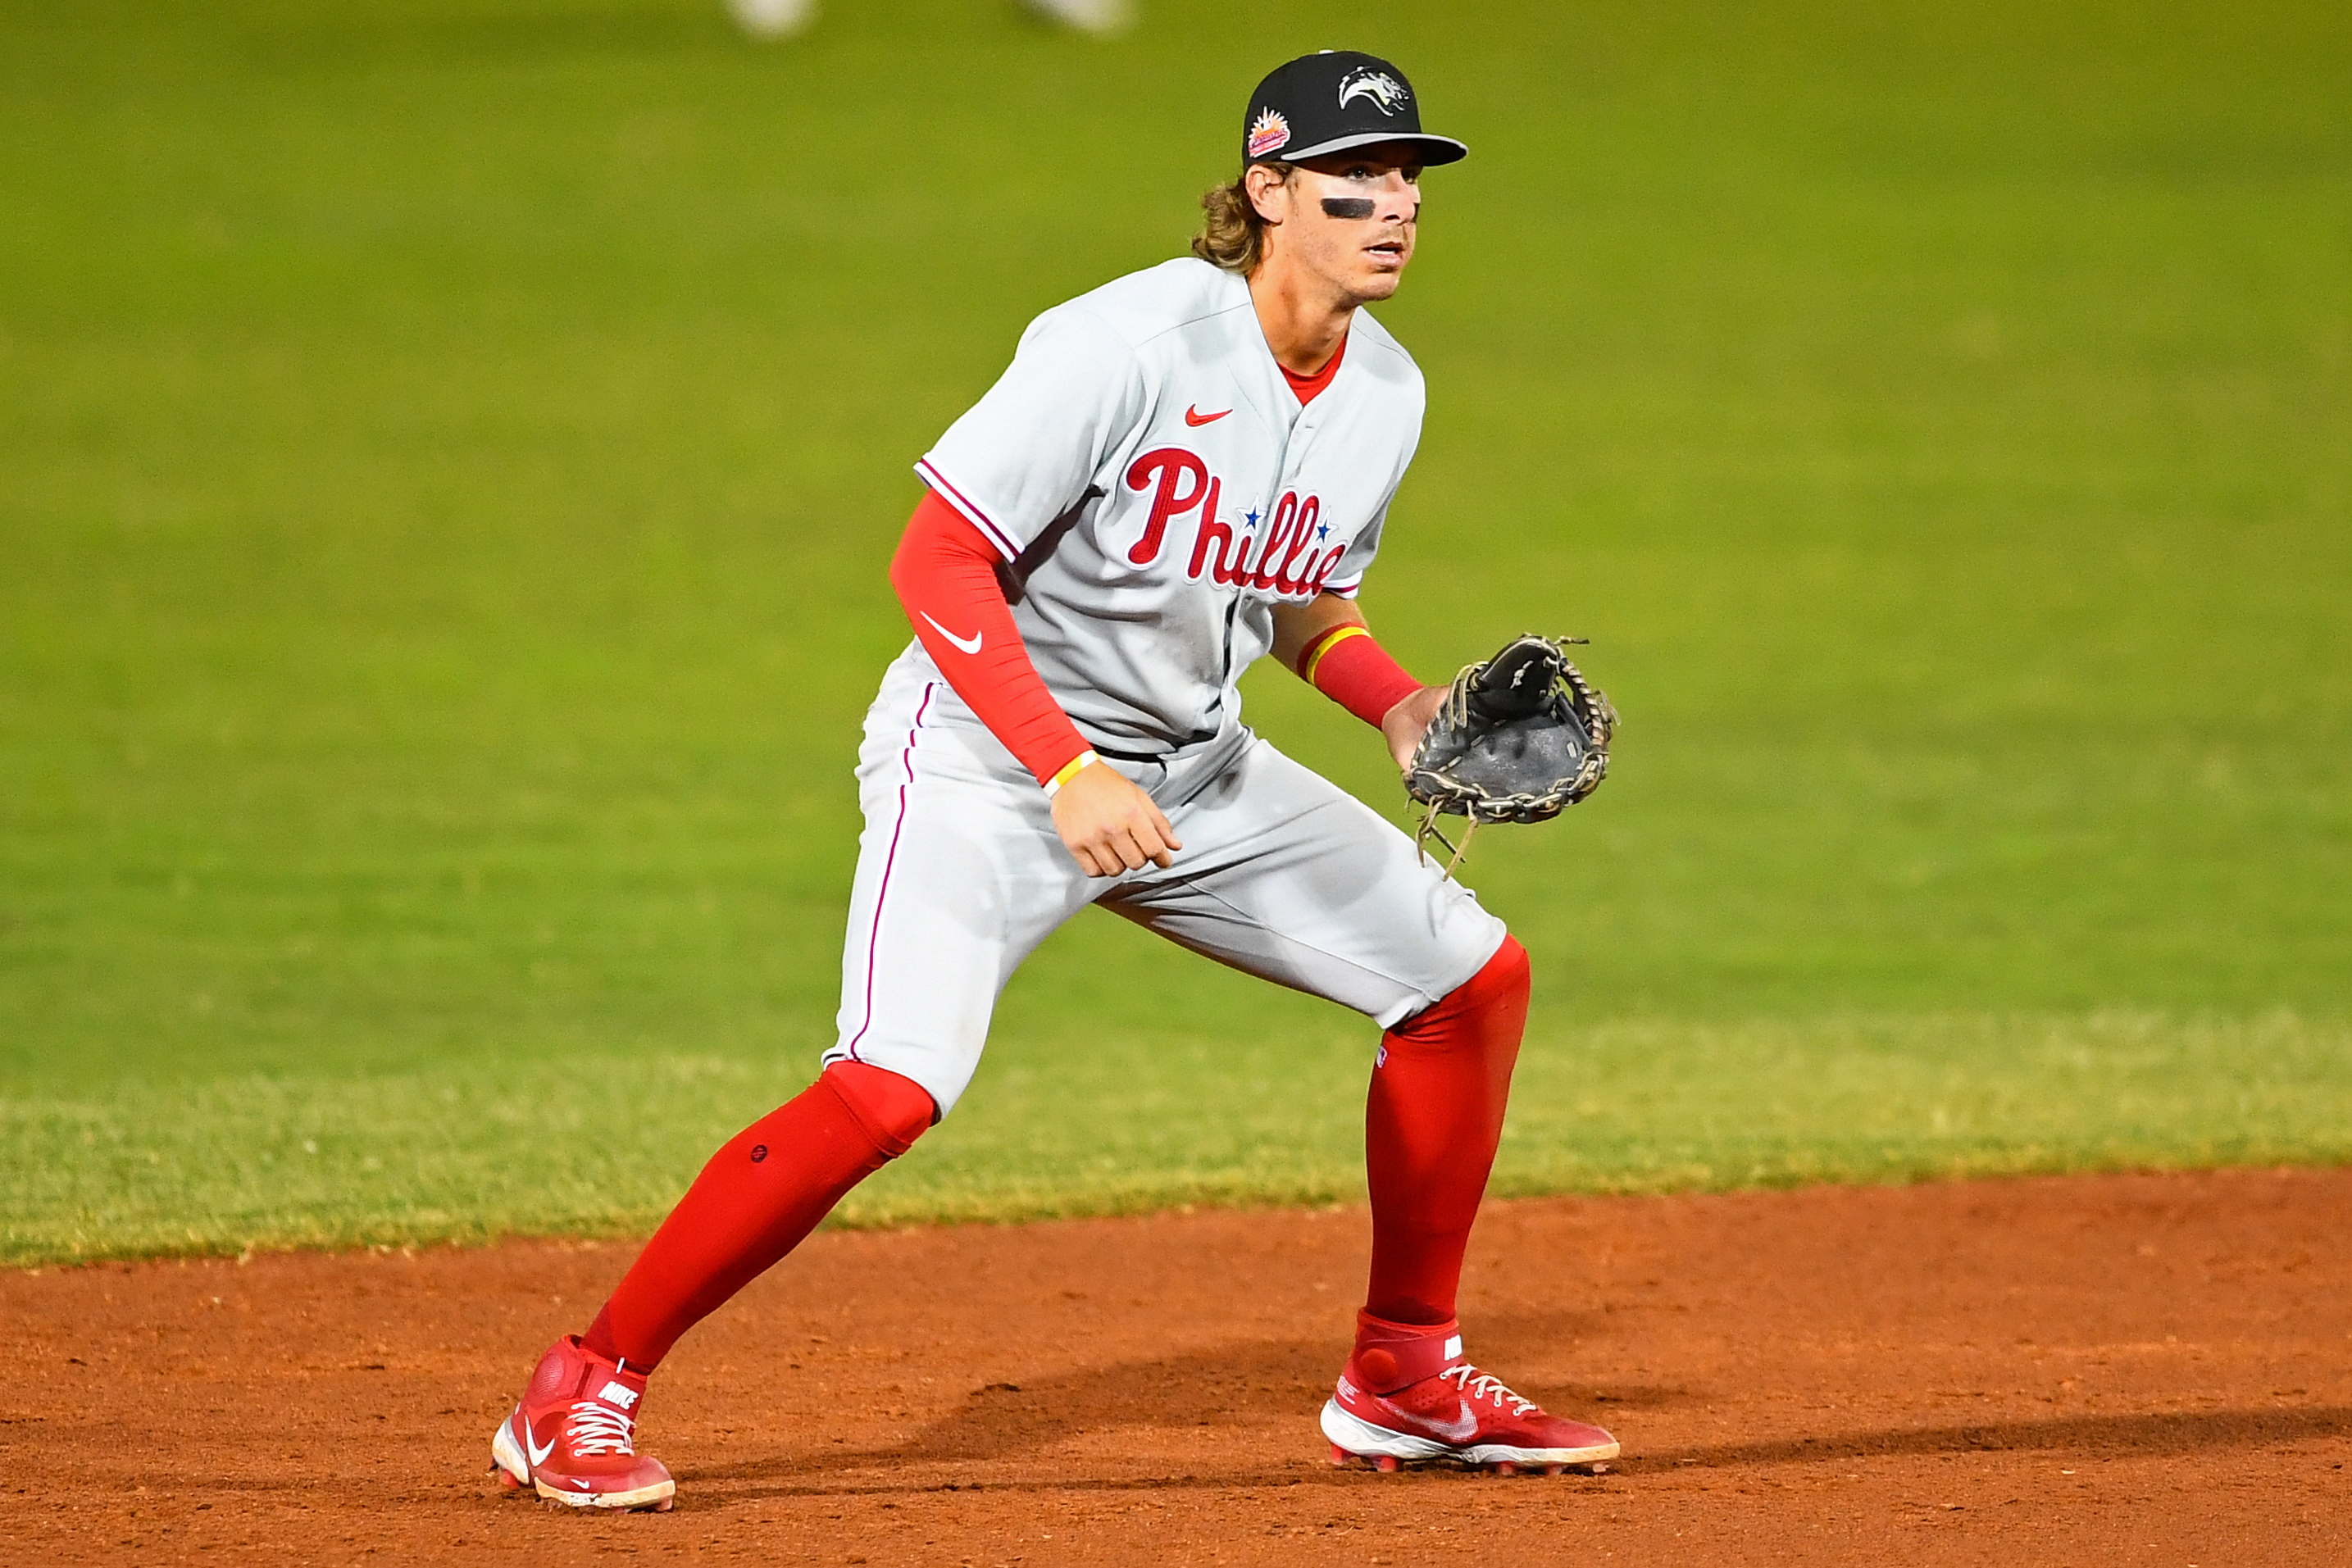 2021 Position Series: Shortstop. After returning from a fractured